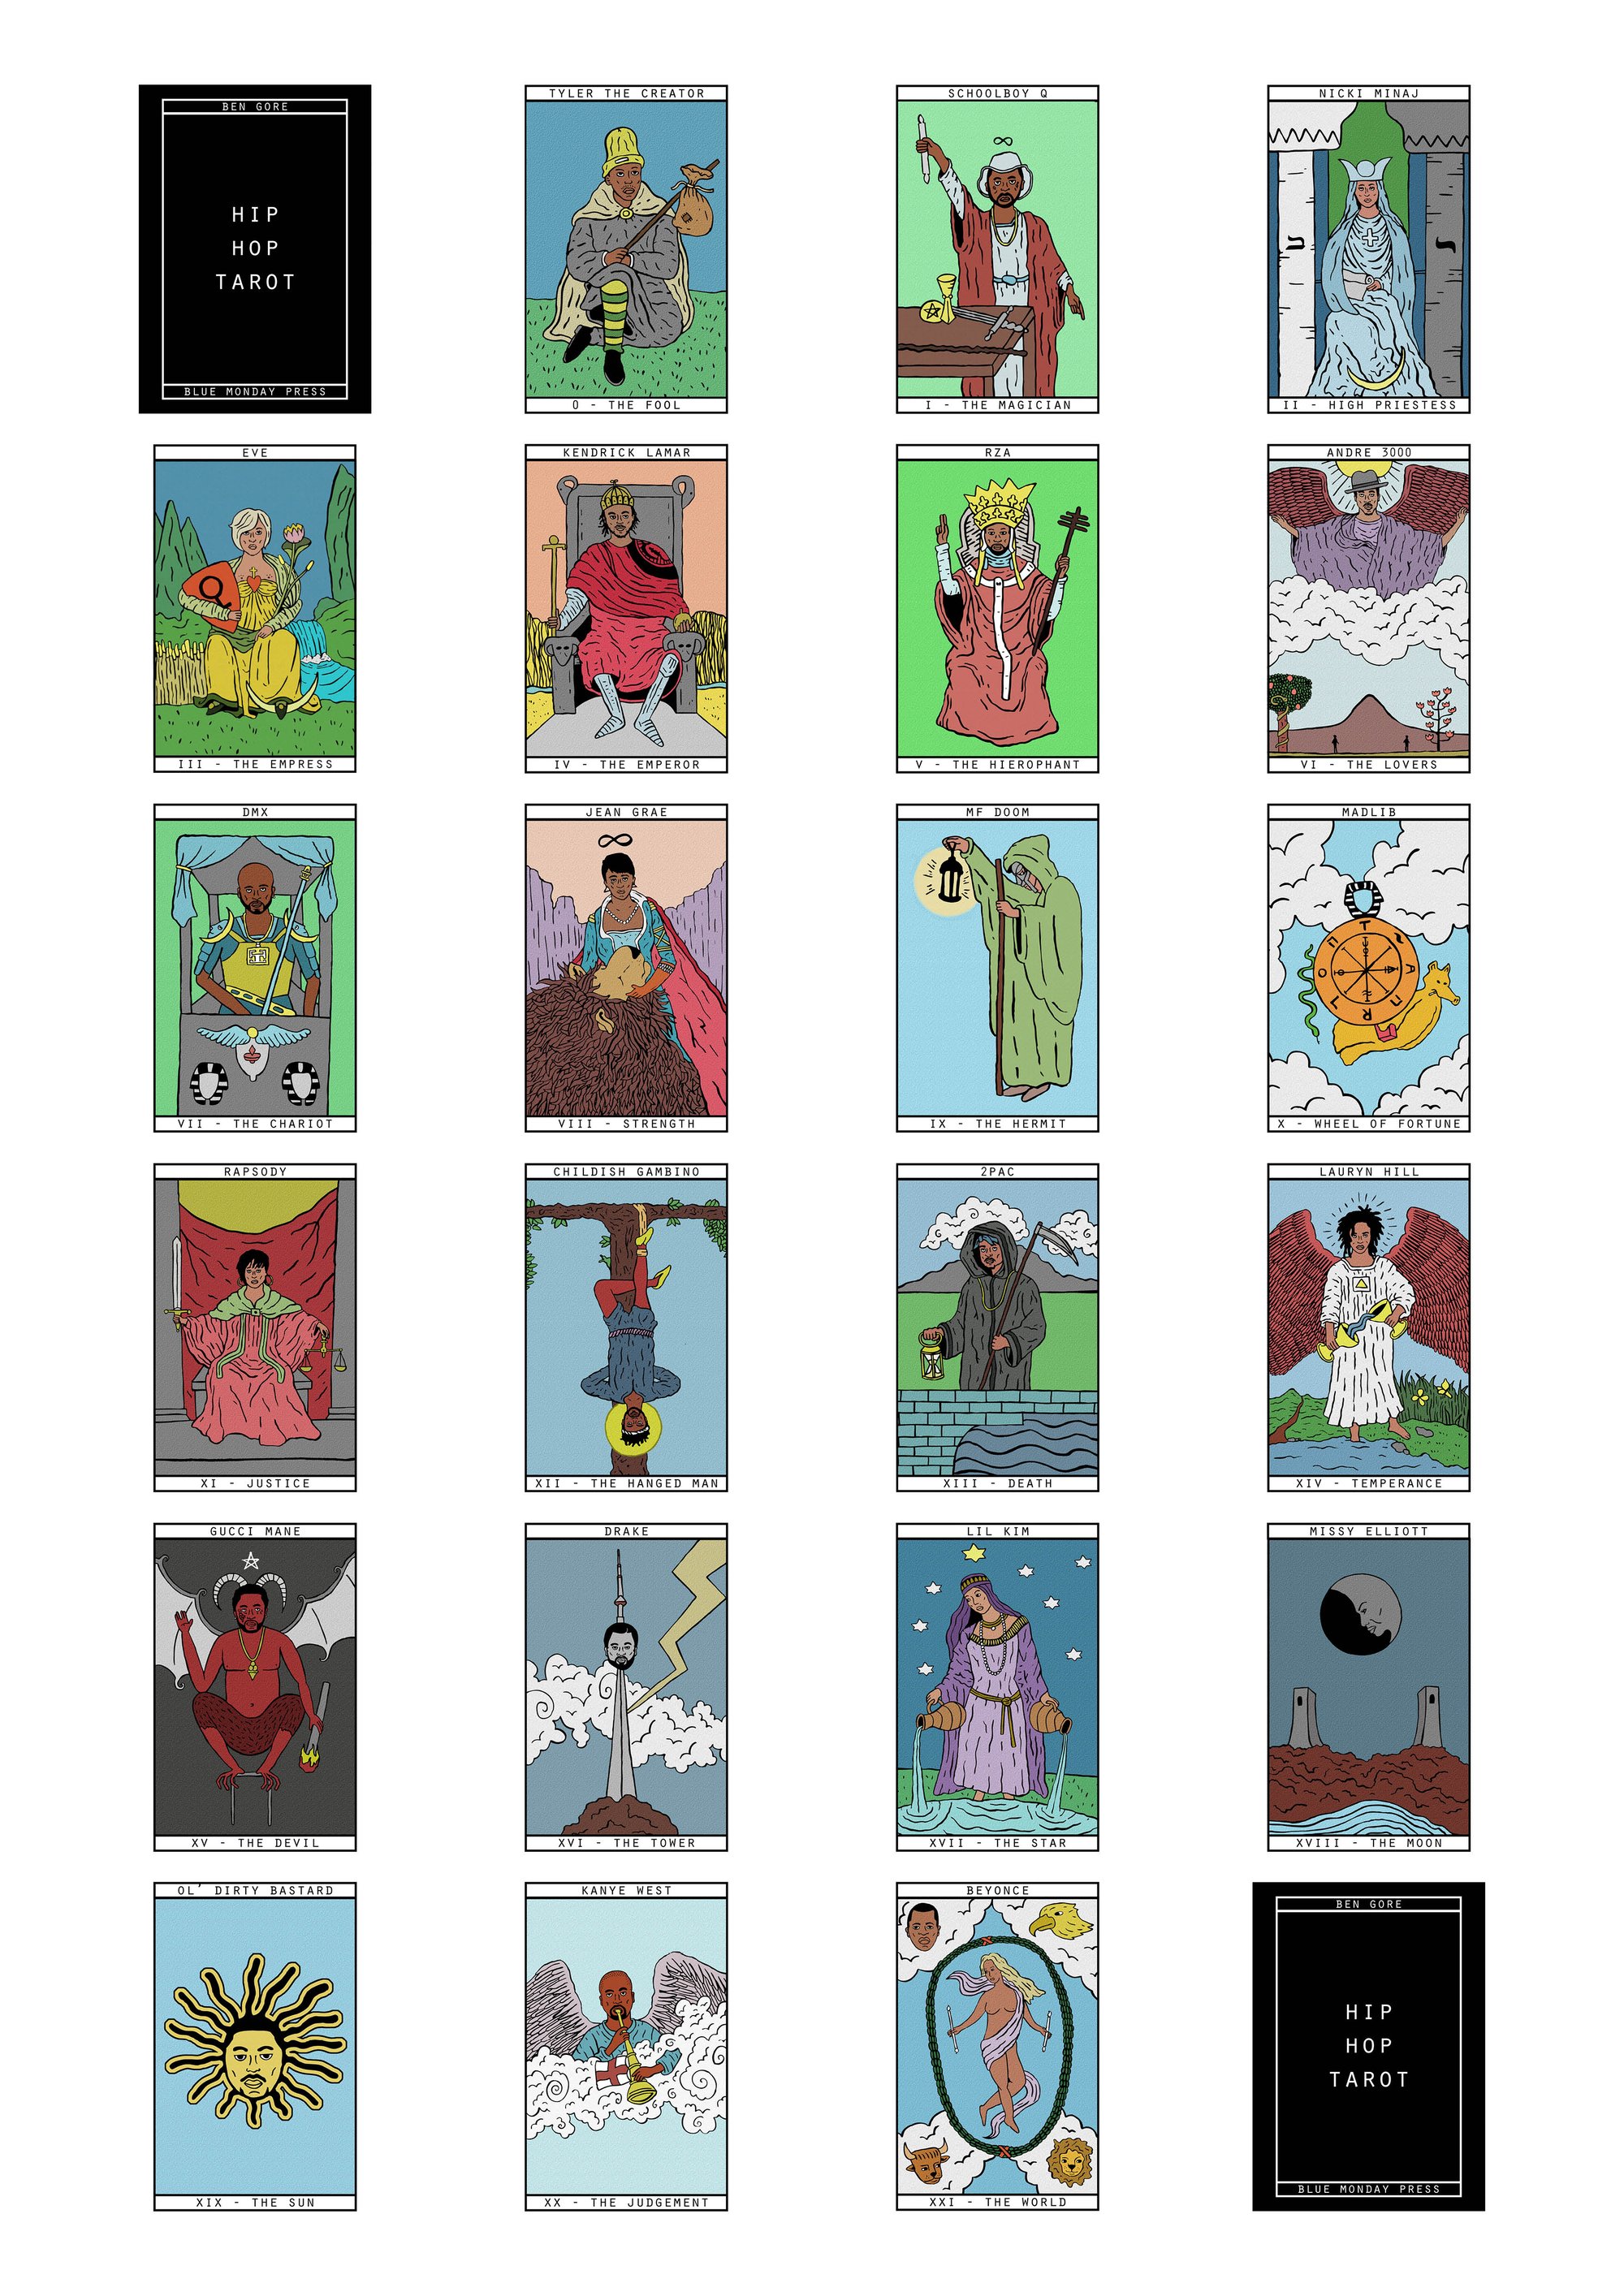 You won't believe why tarot cards are actually a great self-care tool